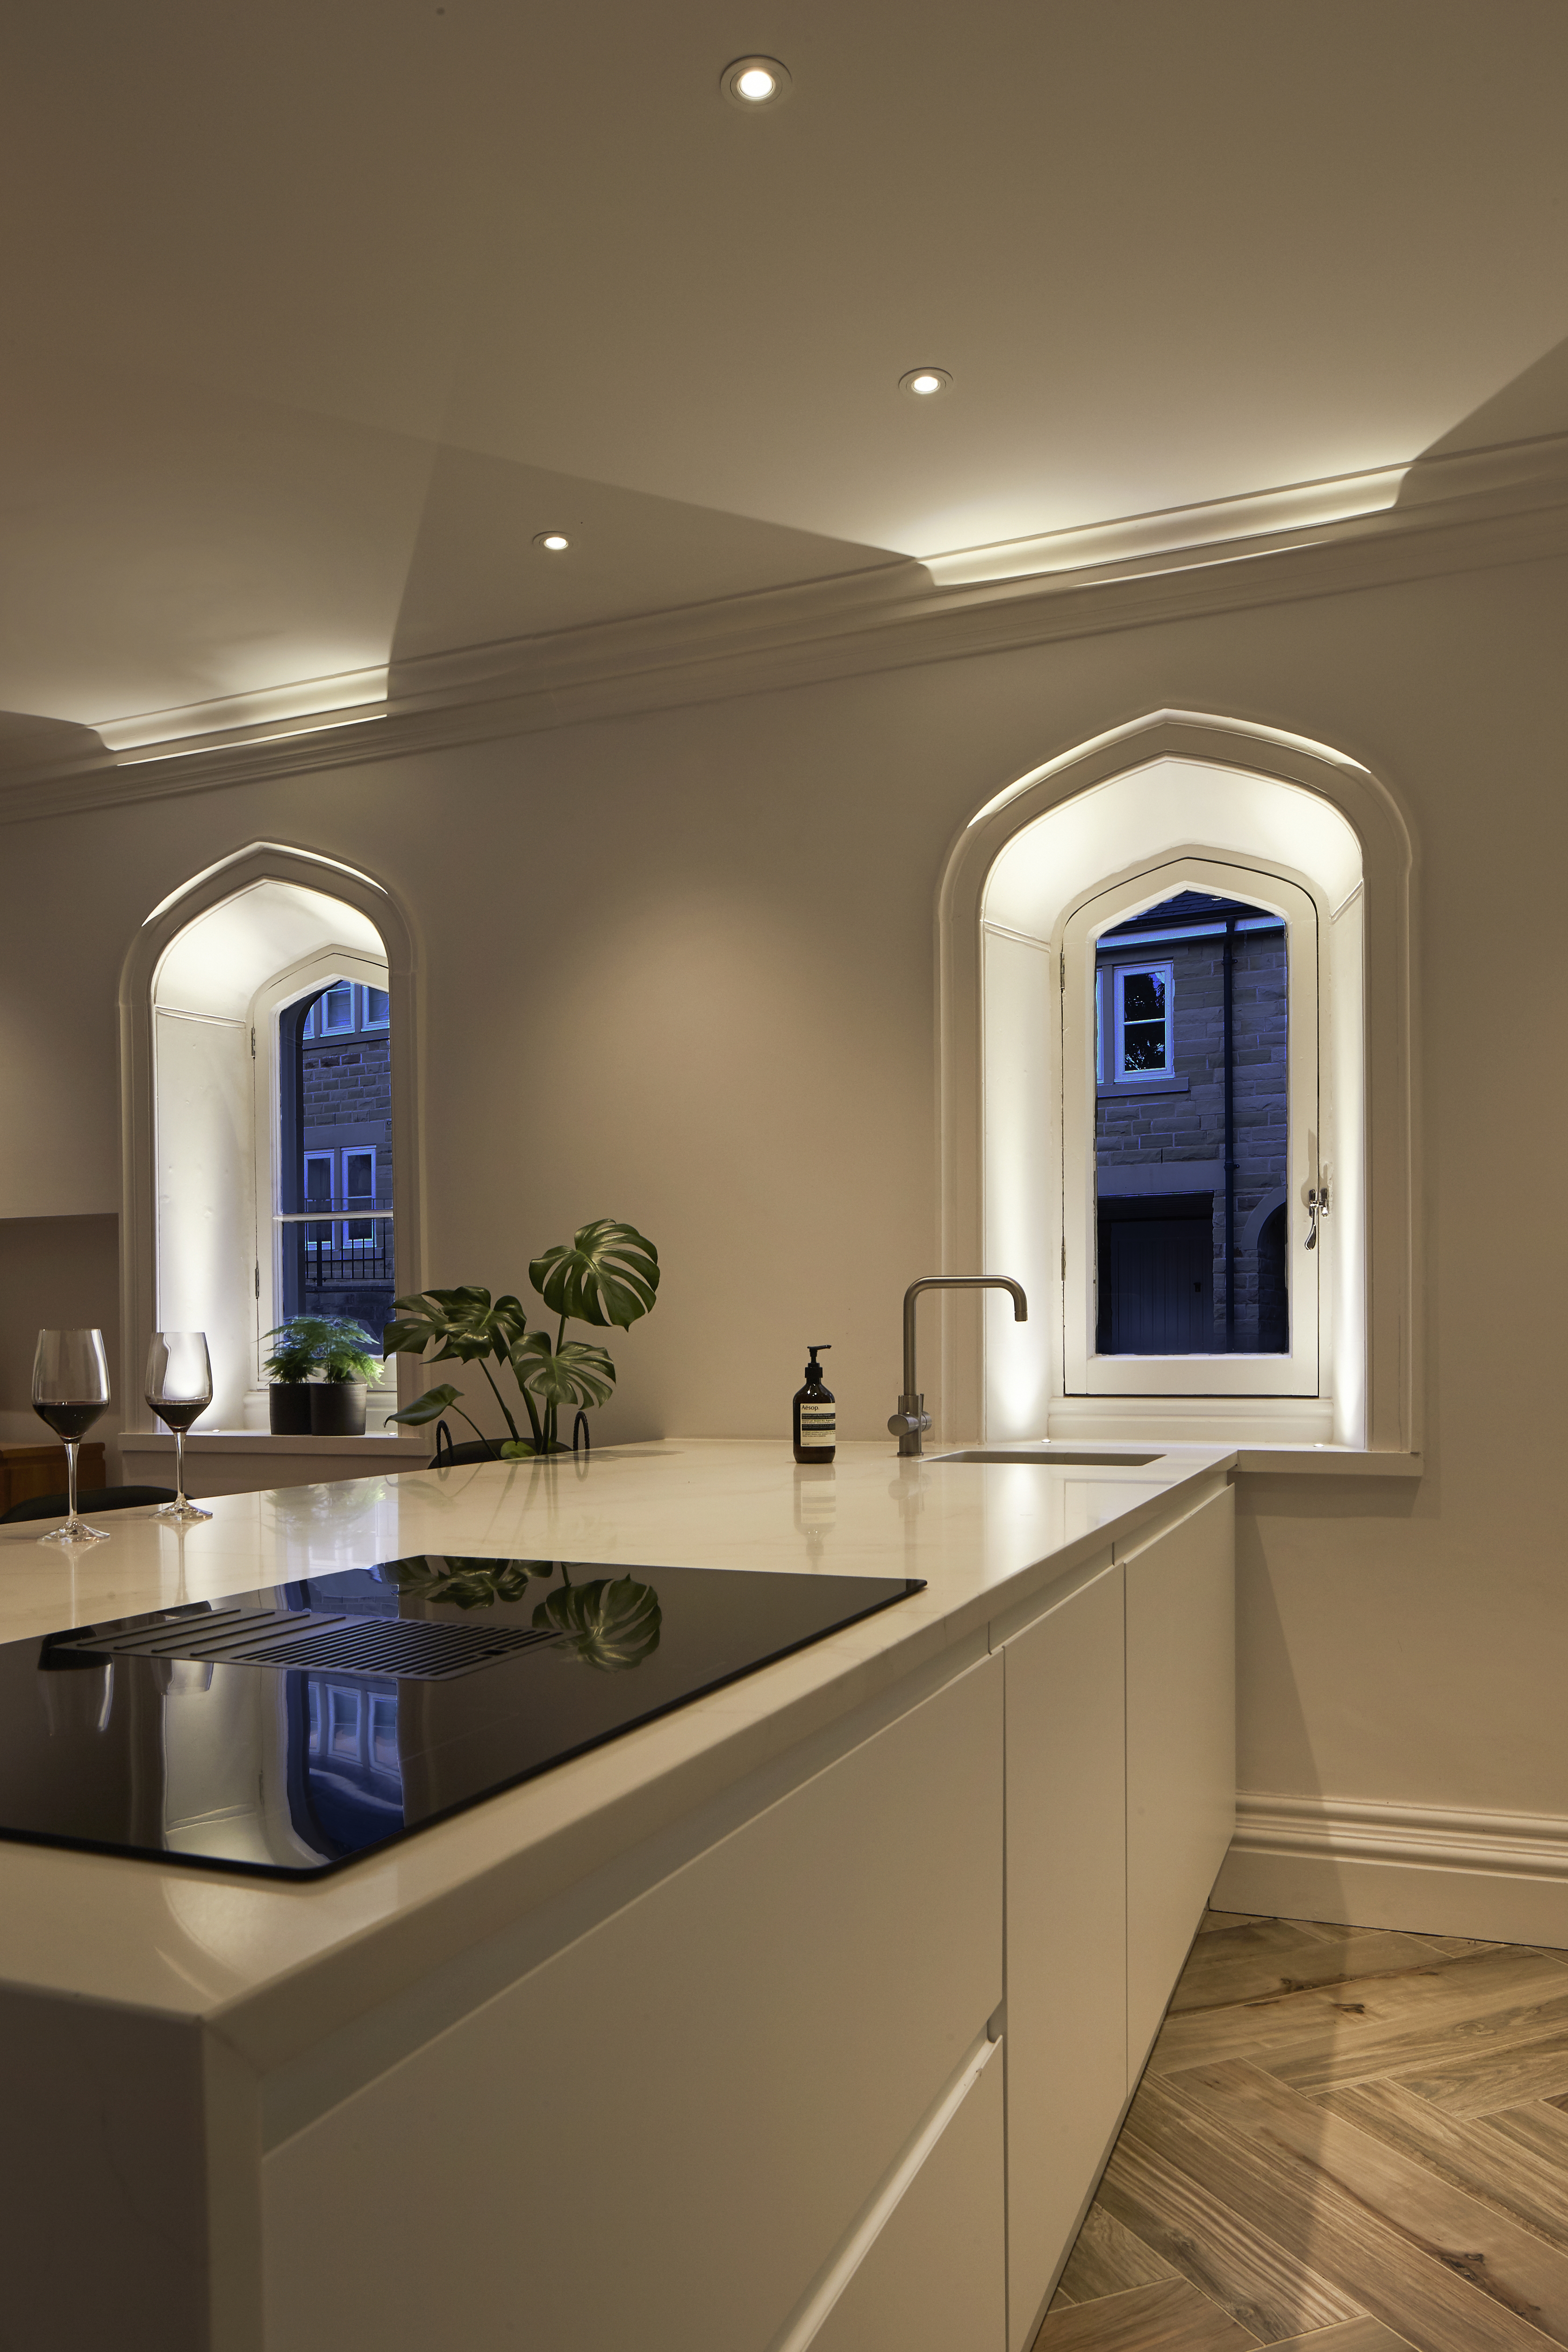 Lighting design in contemporary white kitchen with large island